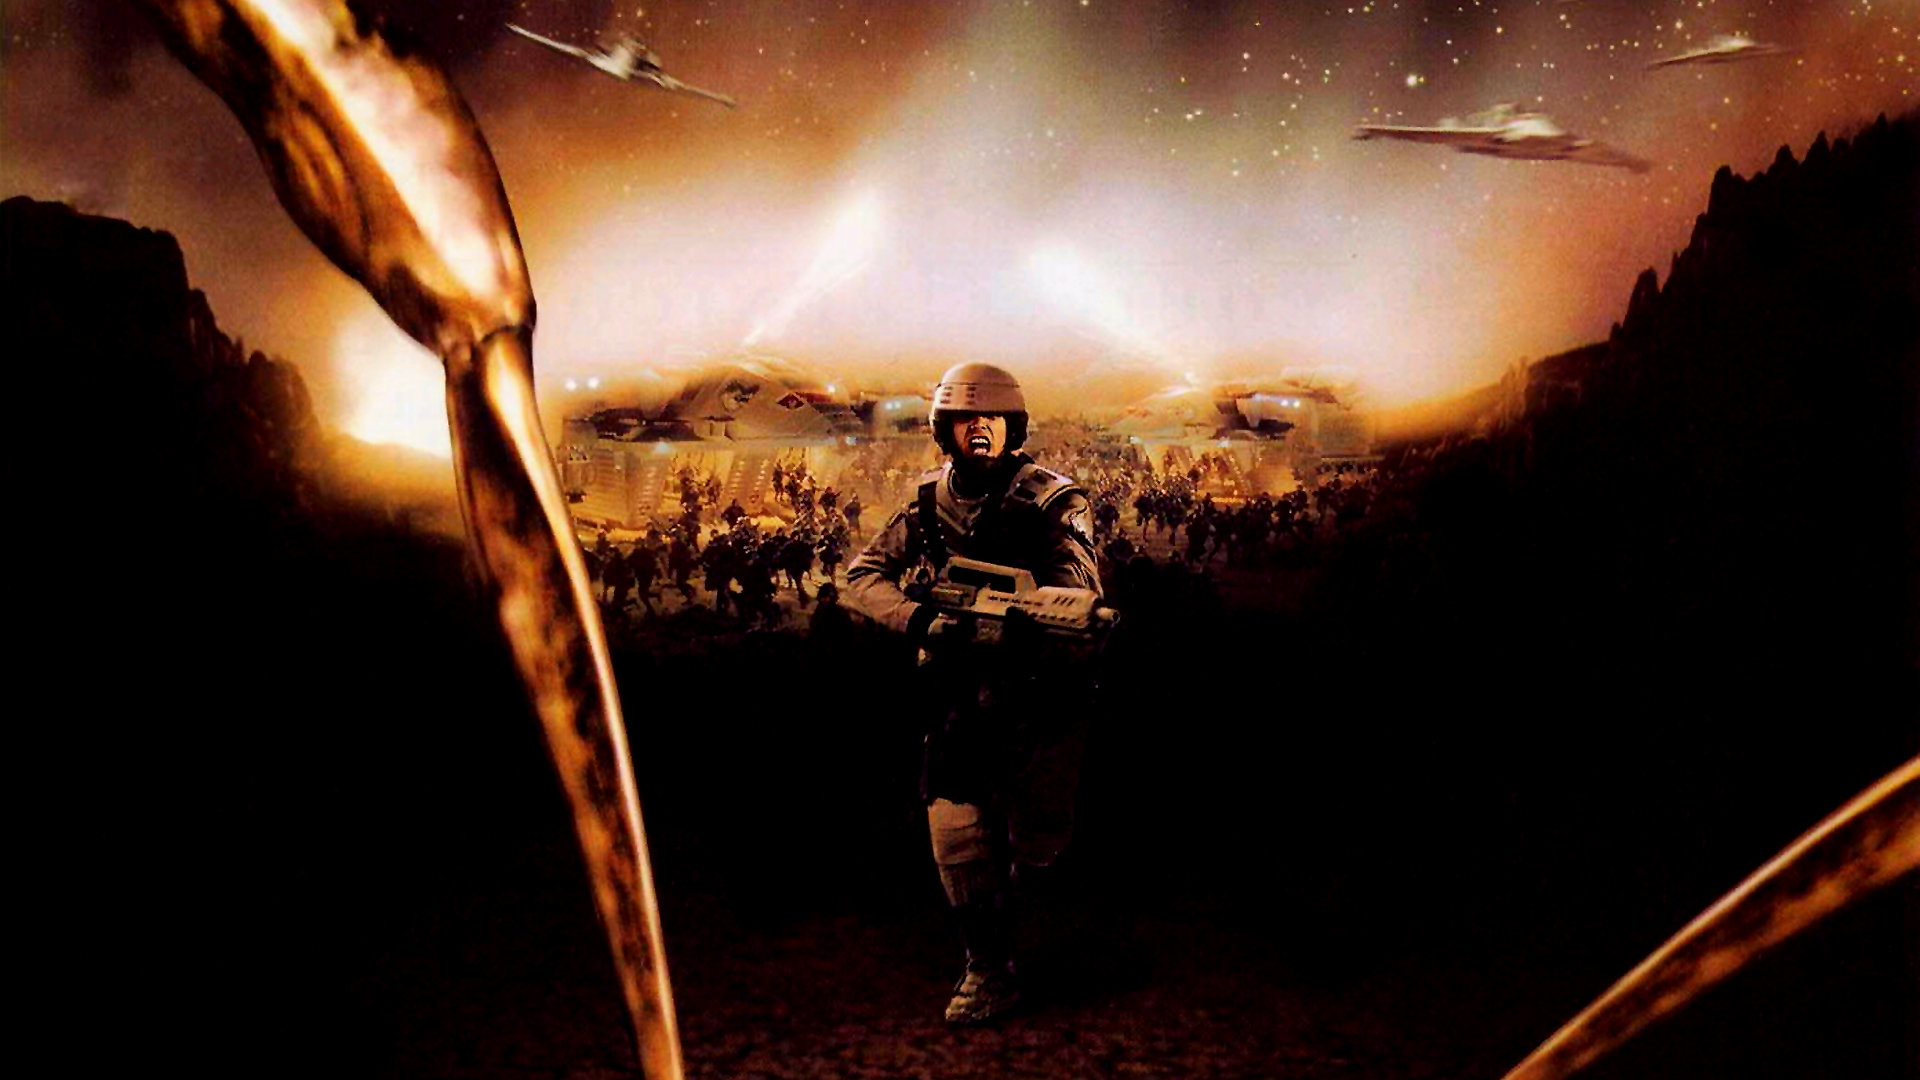 starship troopers wallpaper,photography,movie,darkness,fictional character,illustration